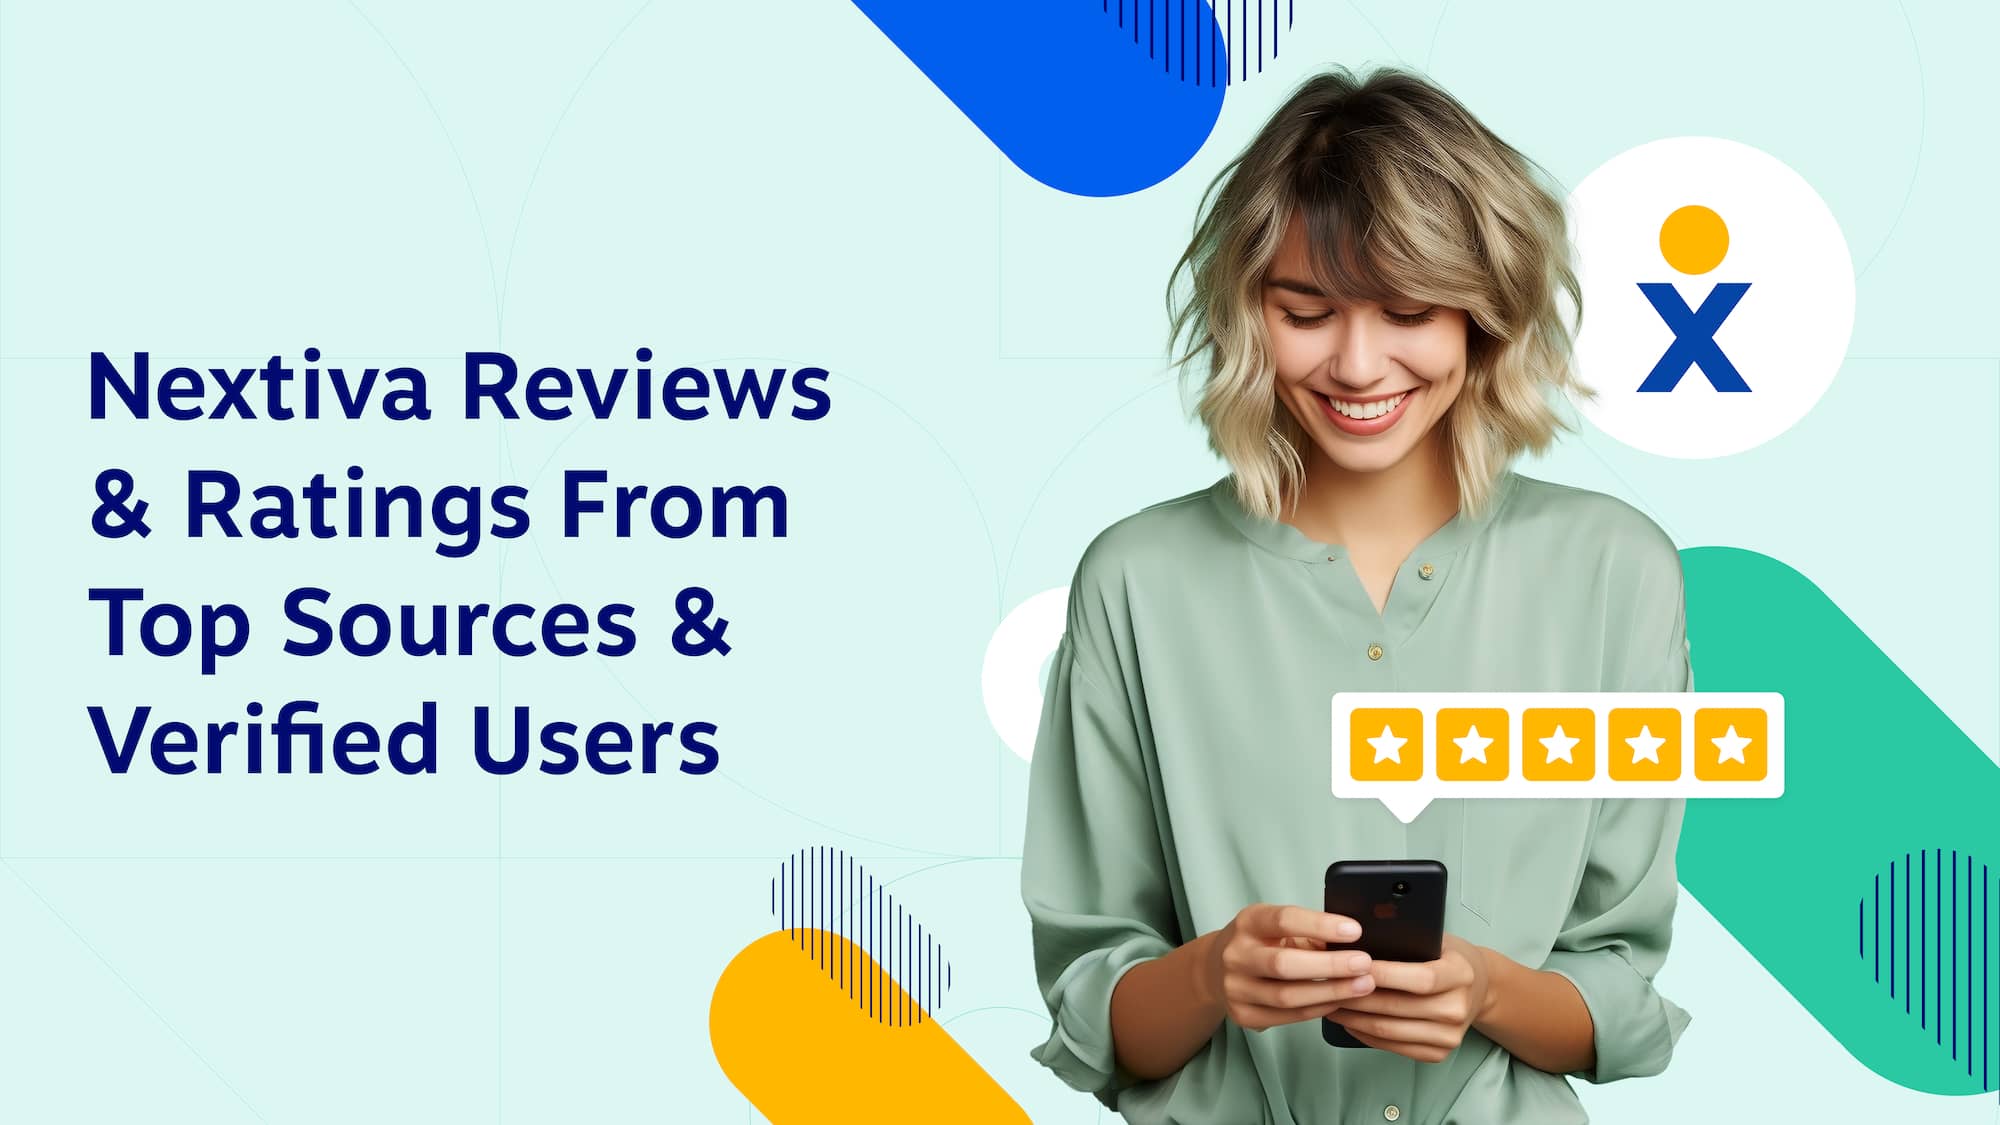 Nextiva Reviews & Ratings from 8,400+ Verified Customers